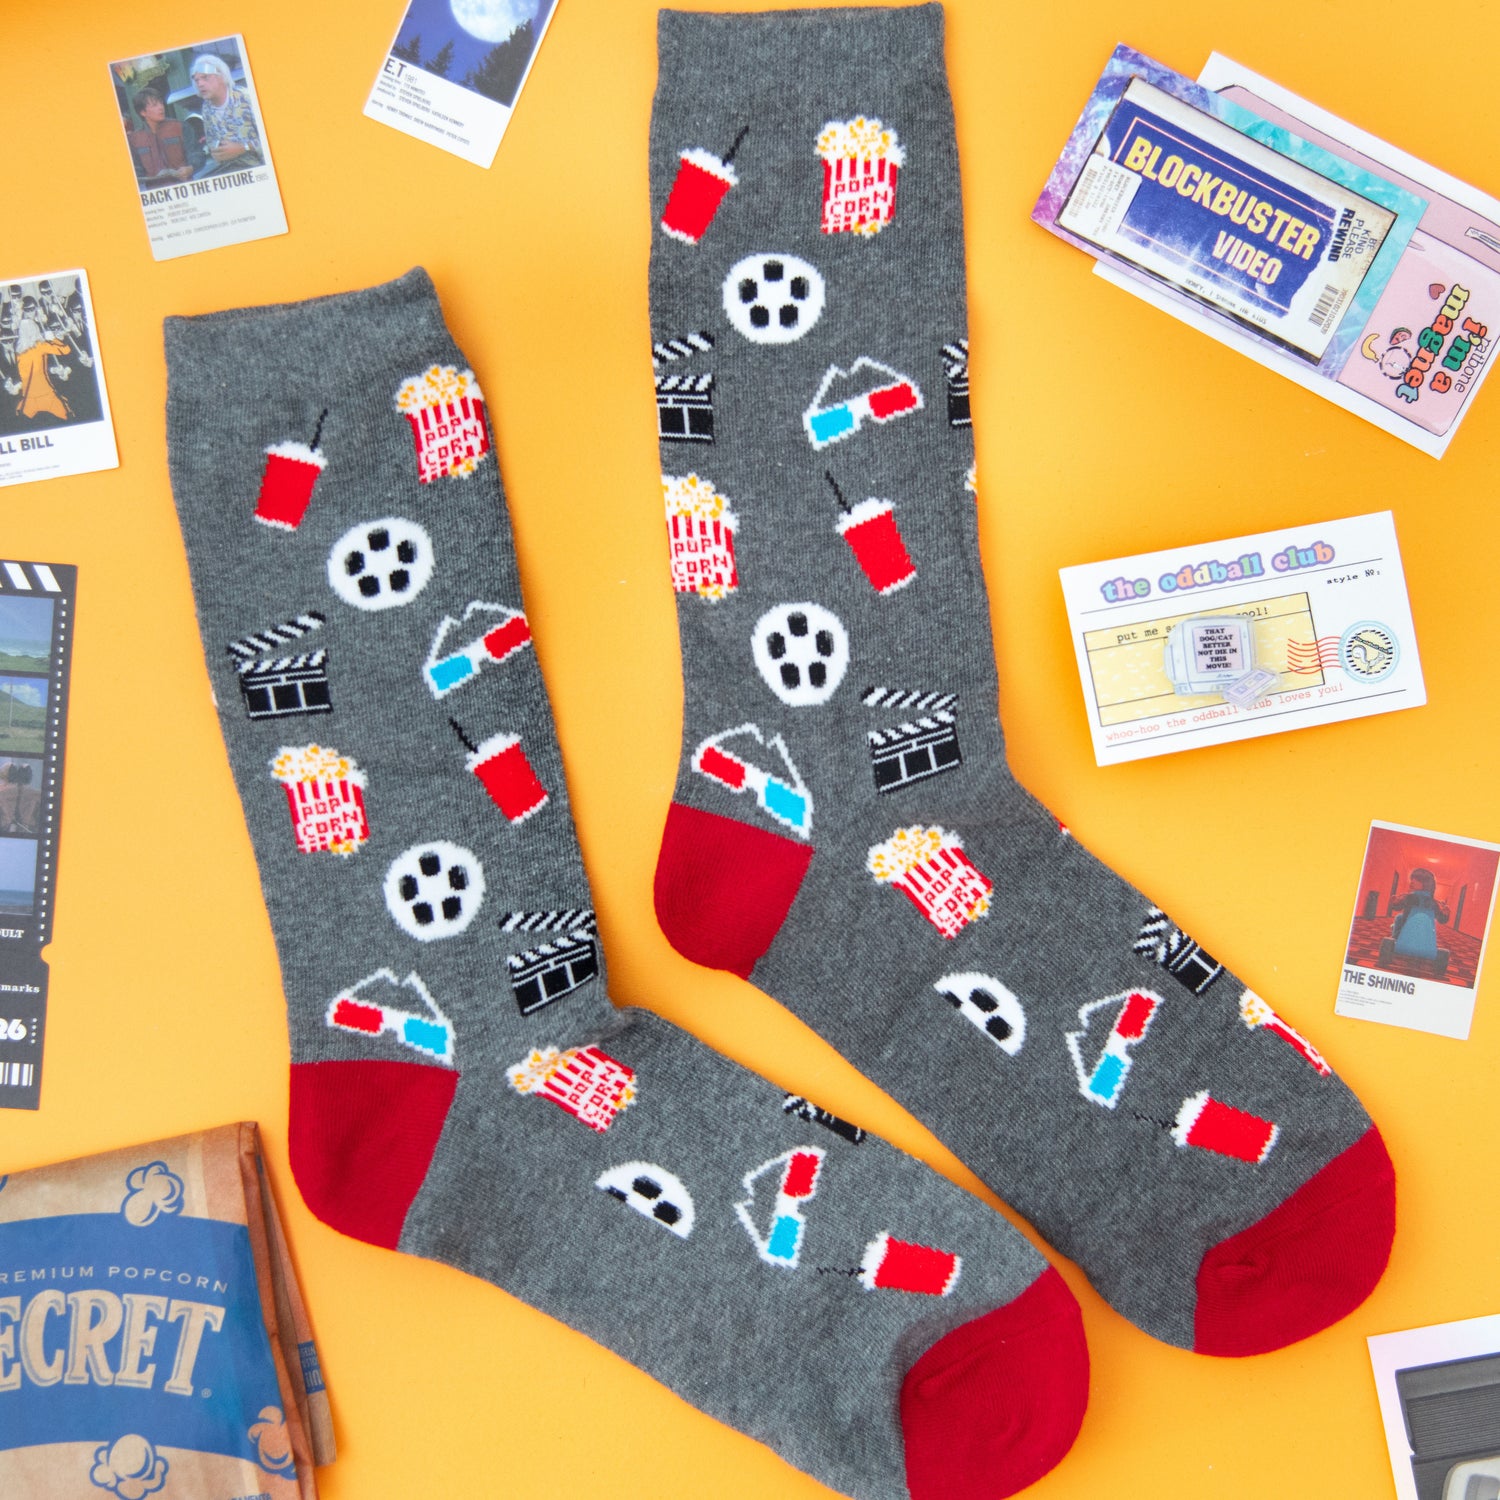 Lights, camera, action! Our movie box subscription is the perfect choice for cinephiles. Get a curated selection of classic socks, blockbuster movie magnet, along with nostalgic snacks and a cozy socks. From rom-coms to thrillers, we've got you covered.